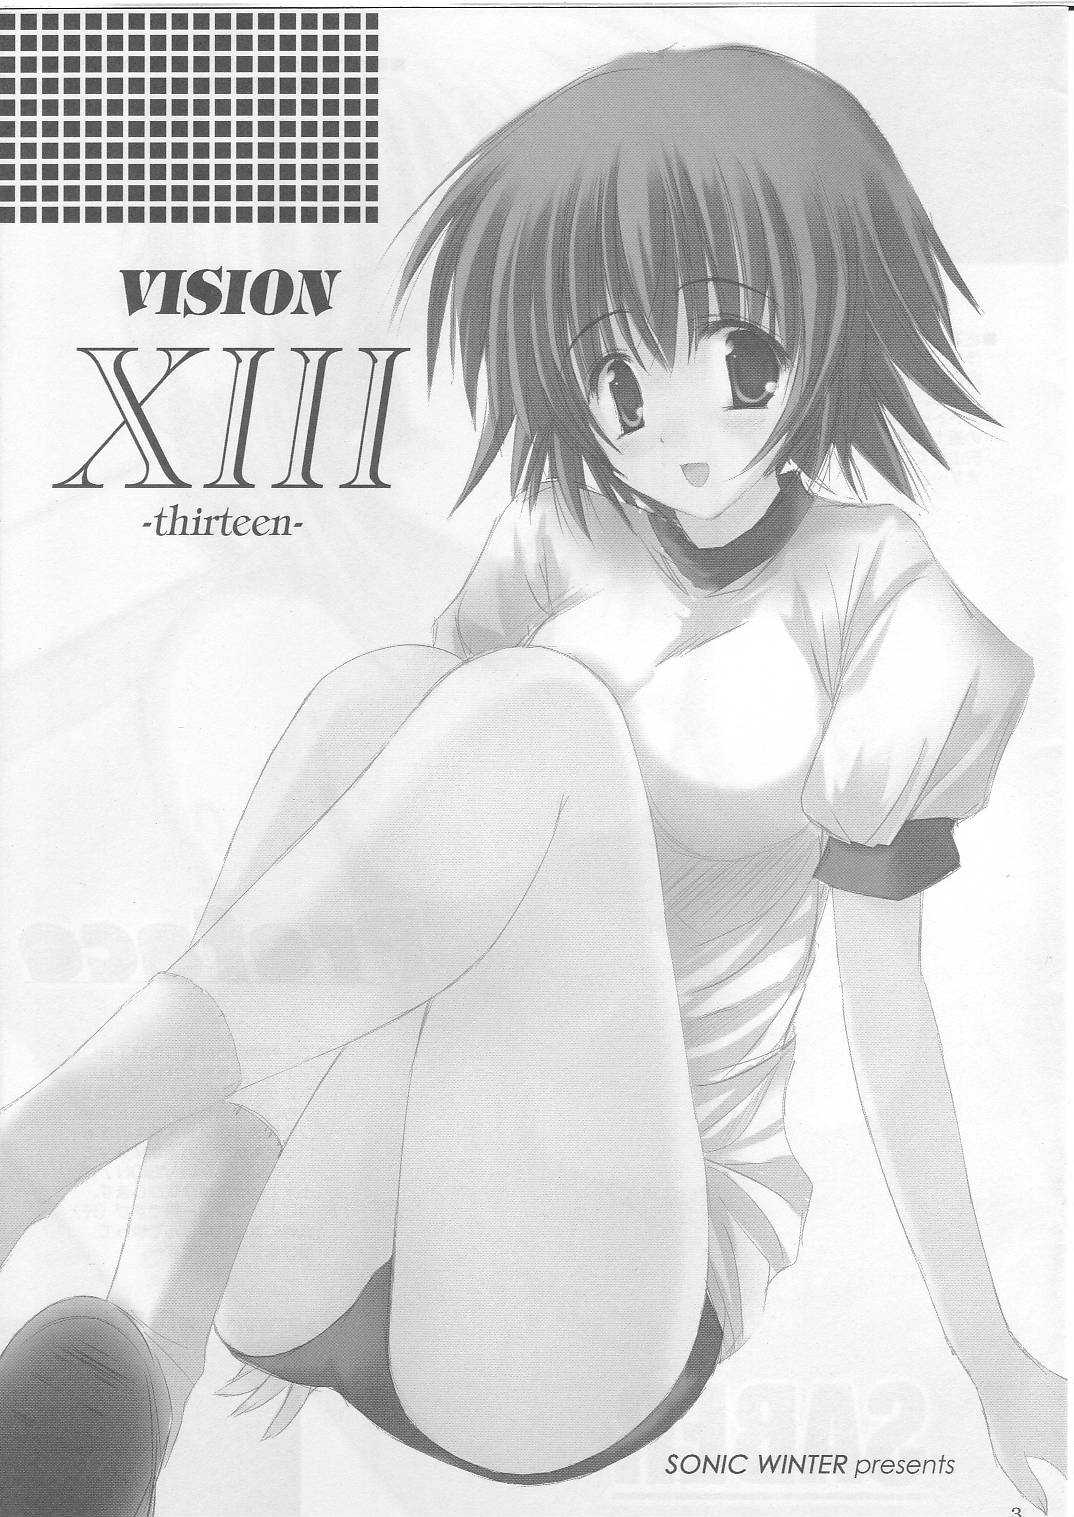 [Sonic Winter] Vision Xiii (Fate Stay Night, To Heart 2) 